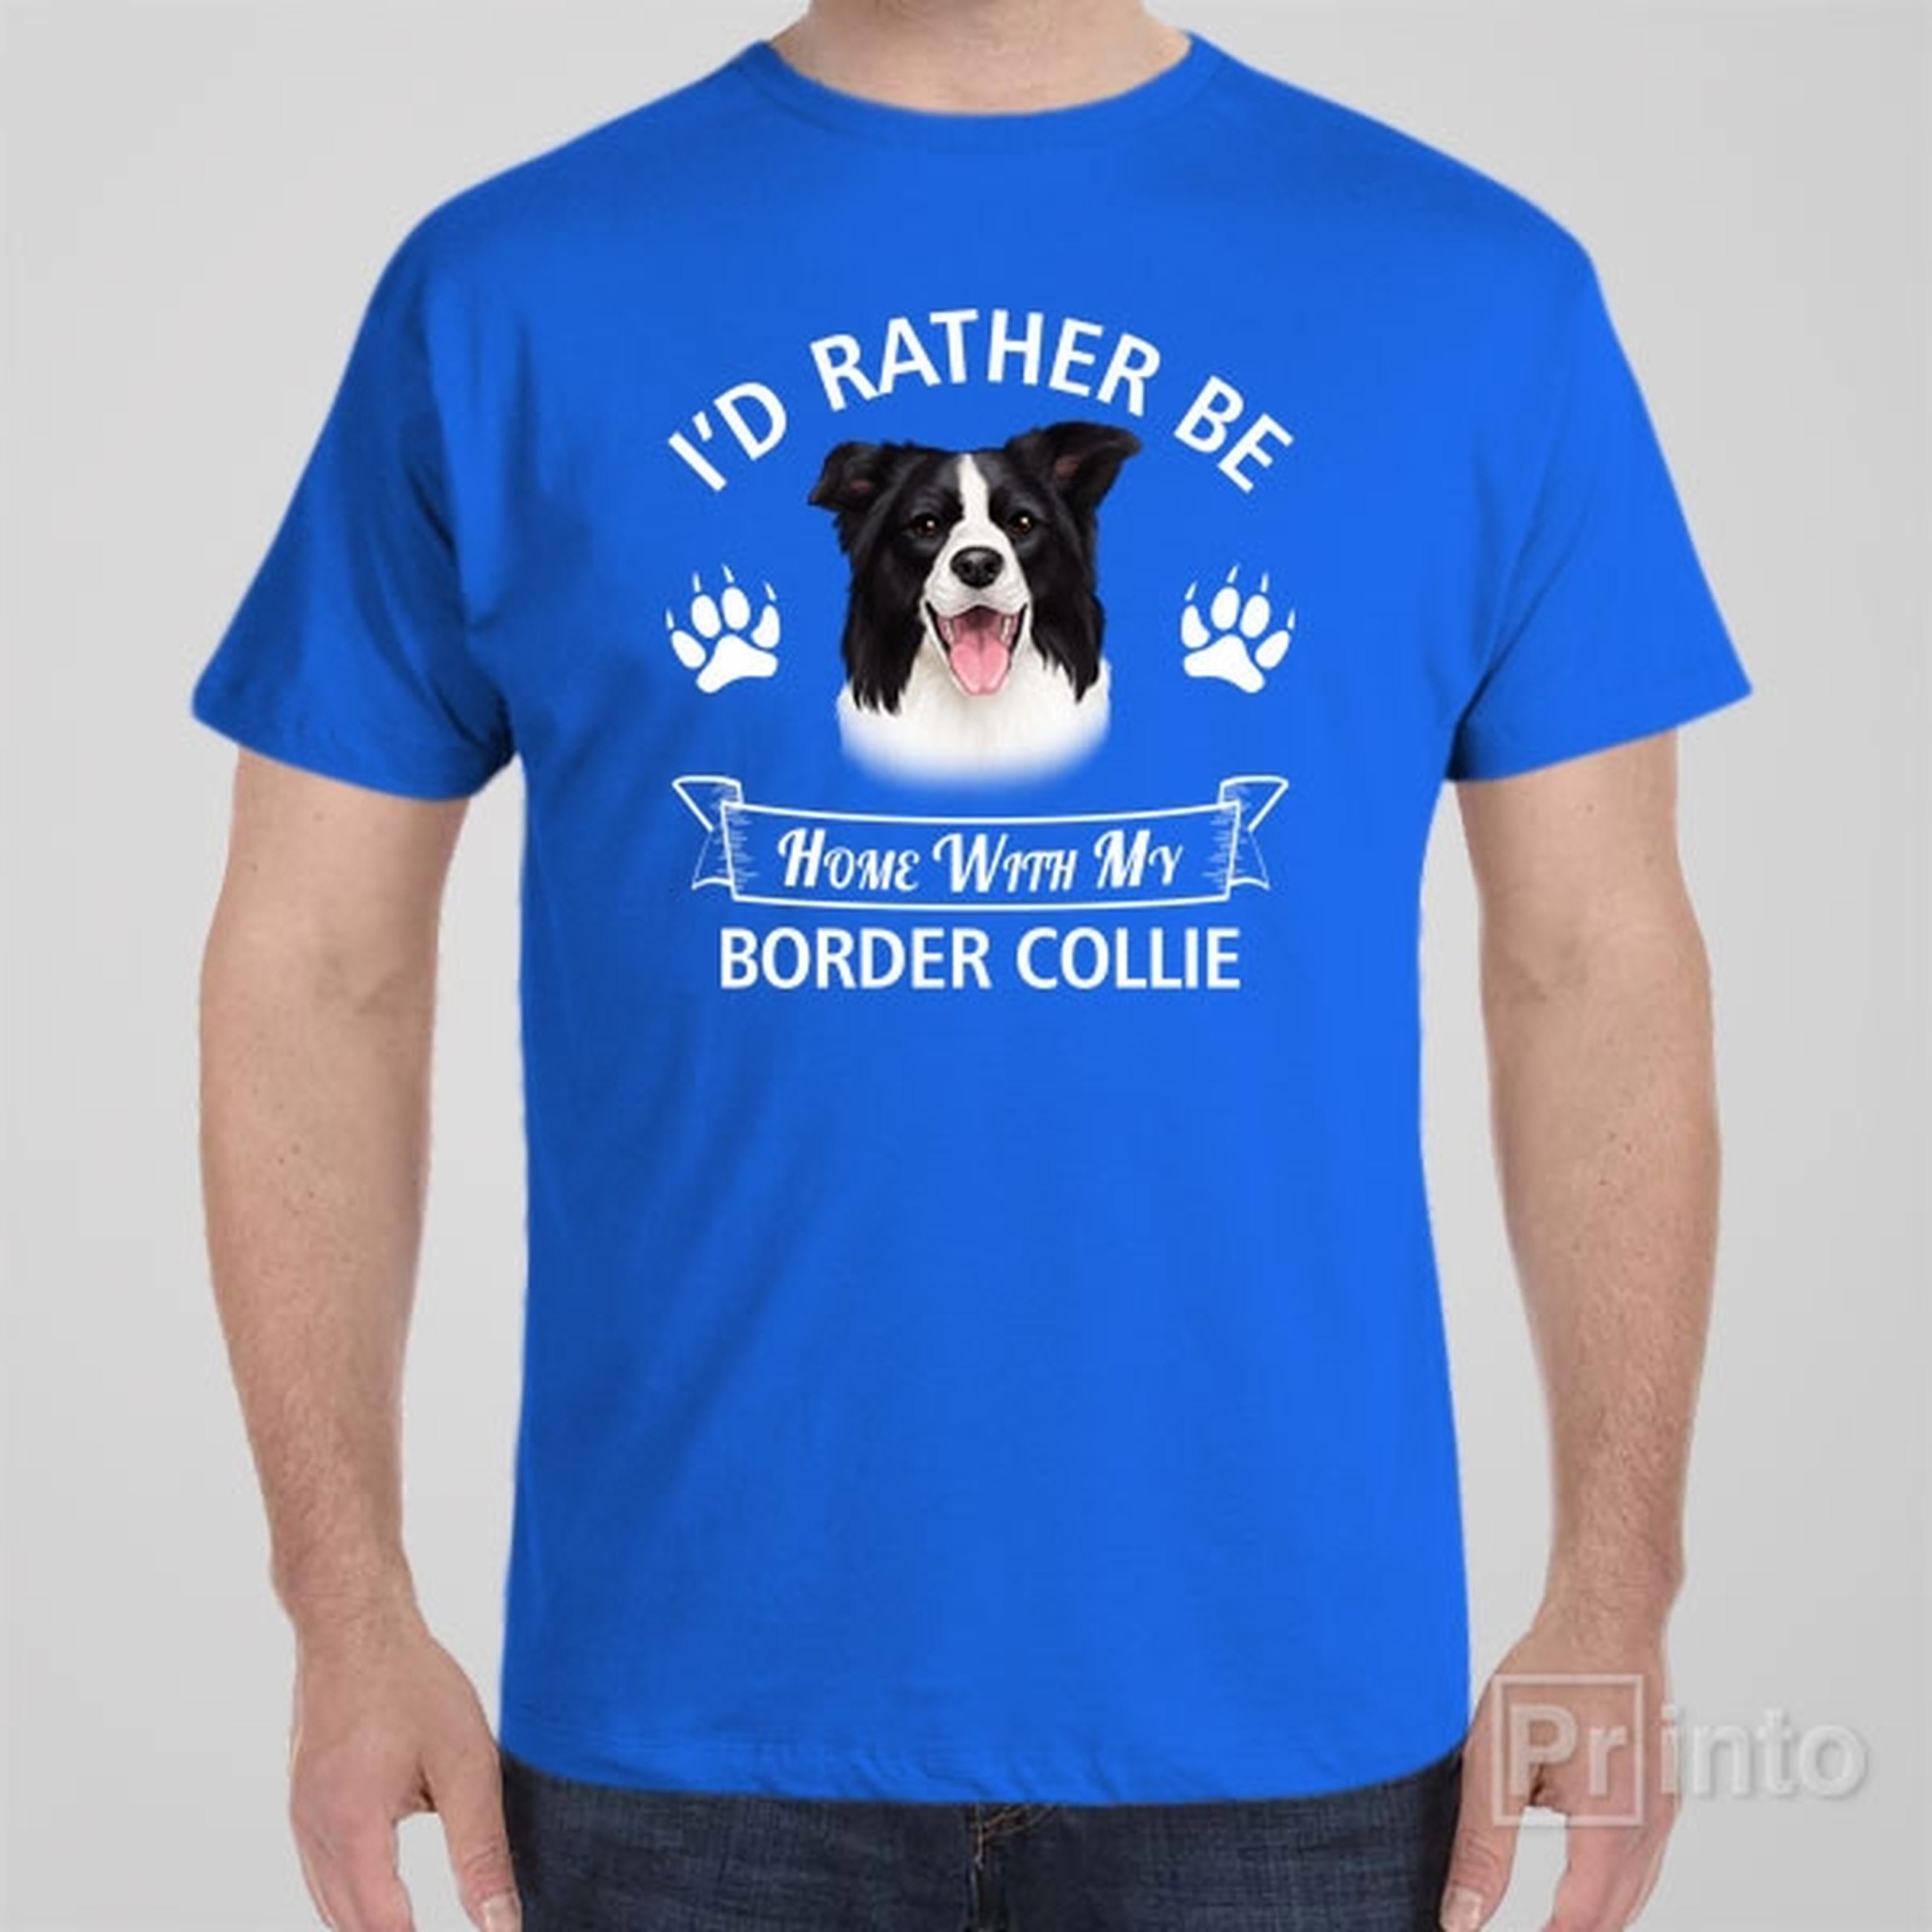 id-rather-stay-home-with-my-border-collie-t-shirt